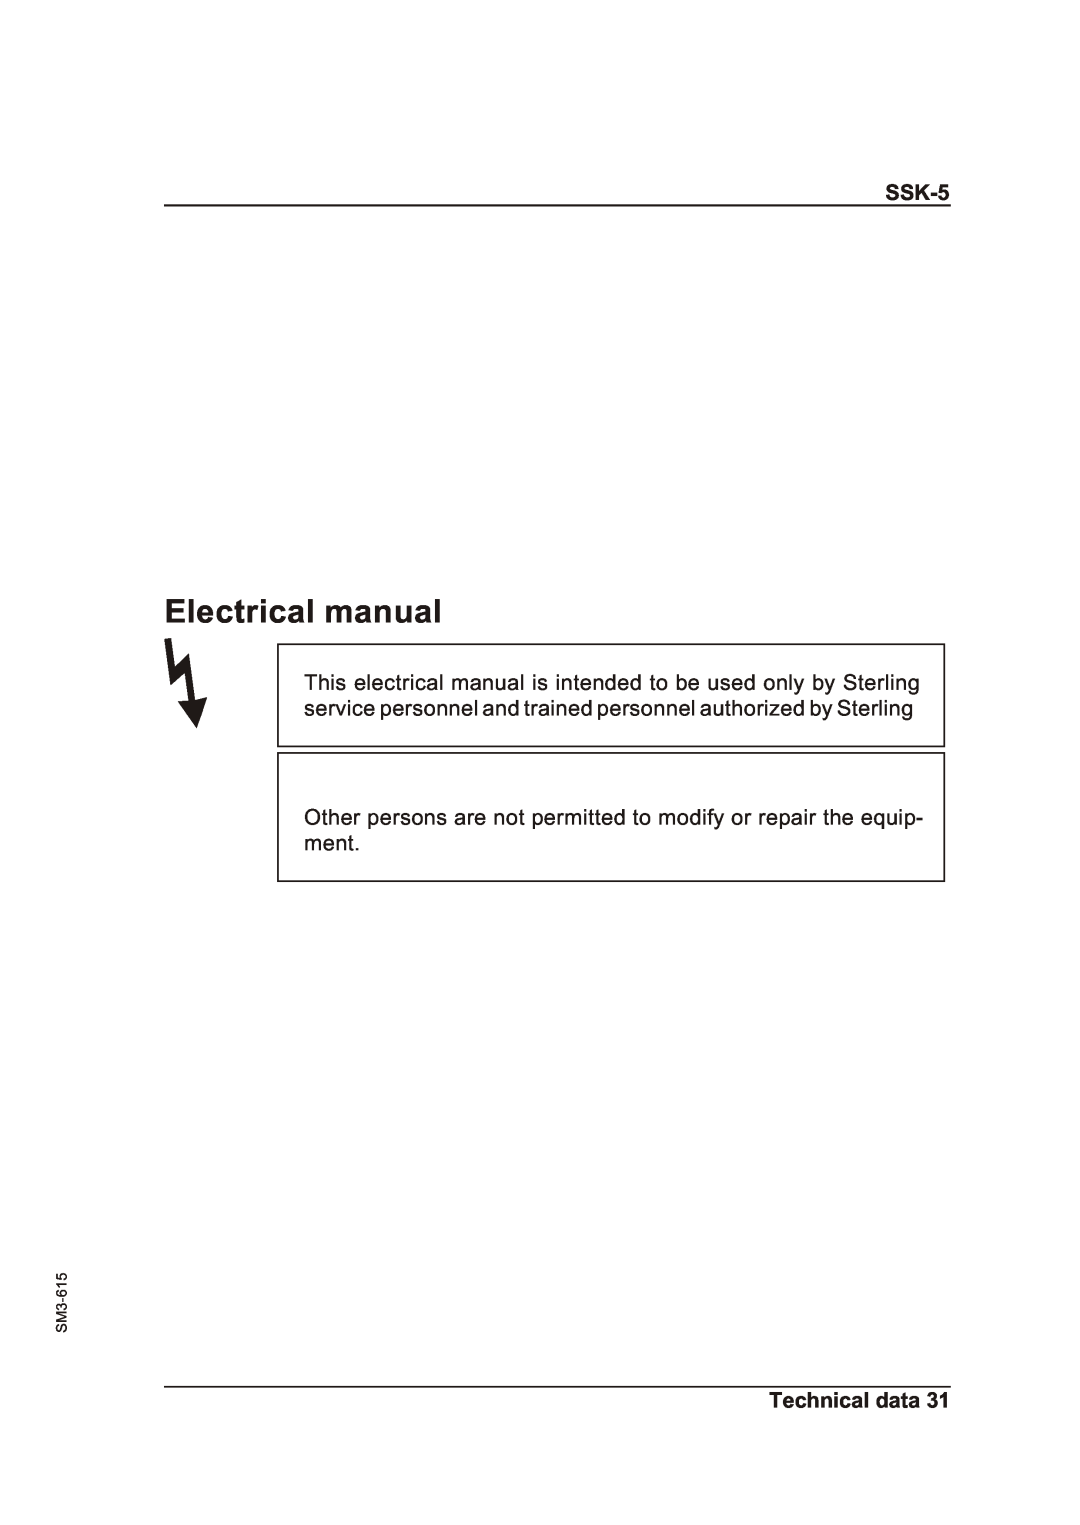 Sterling SSK-5 Electrical manual, Other persons are not permitted to modify or repair the equip- ment, Technical data 